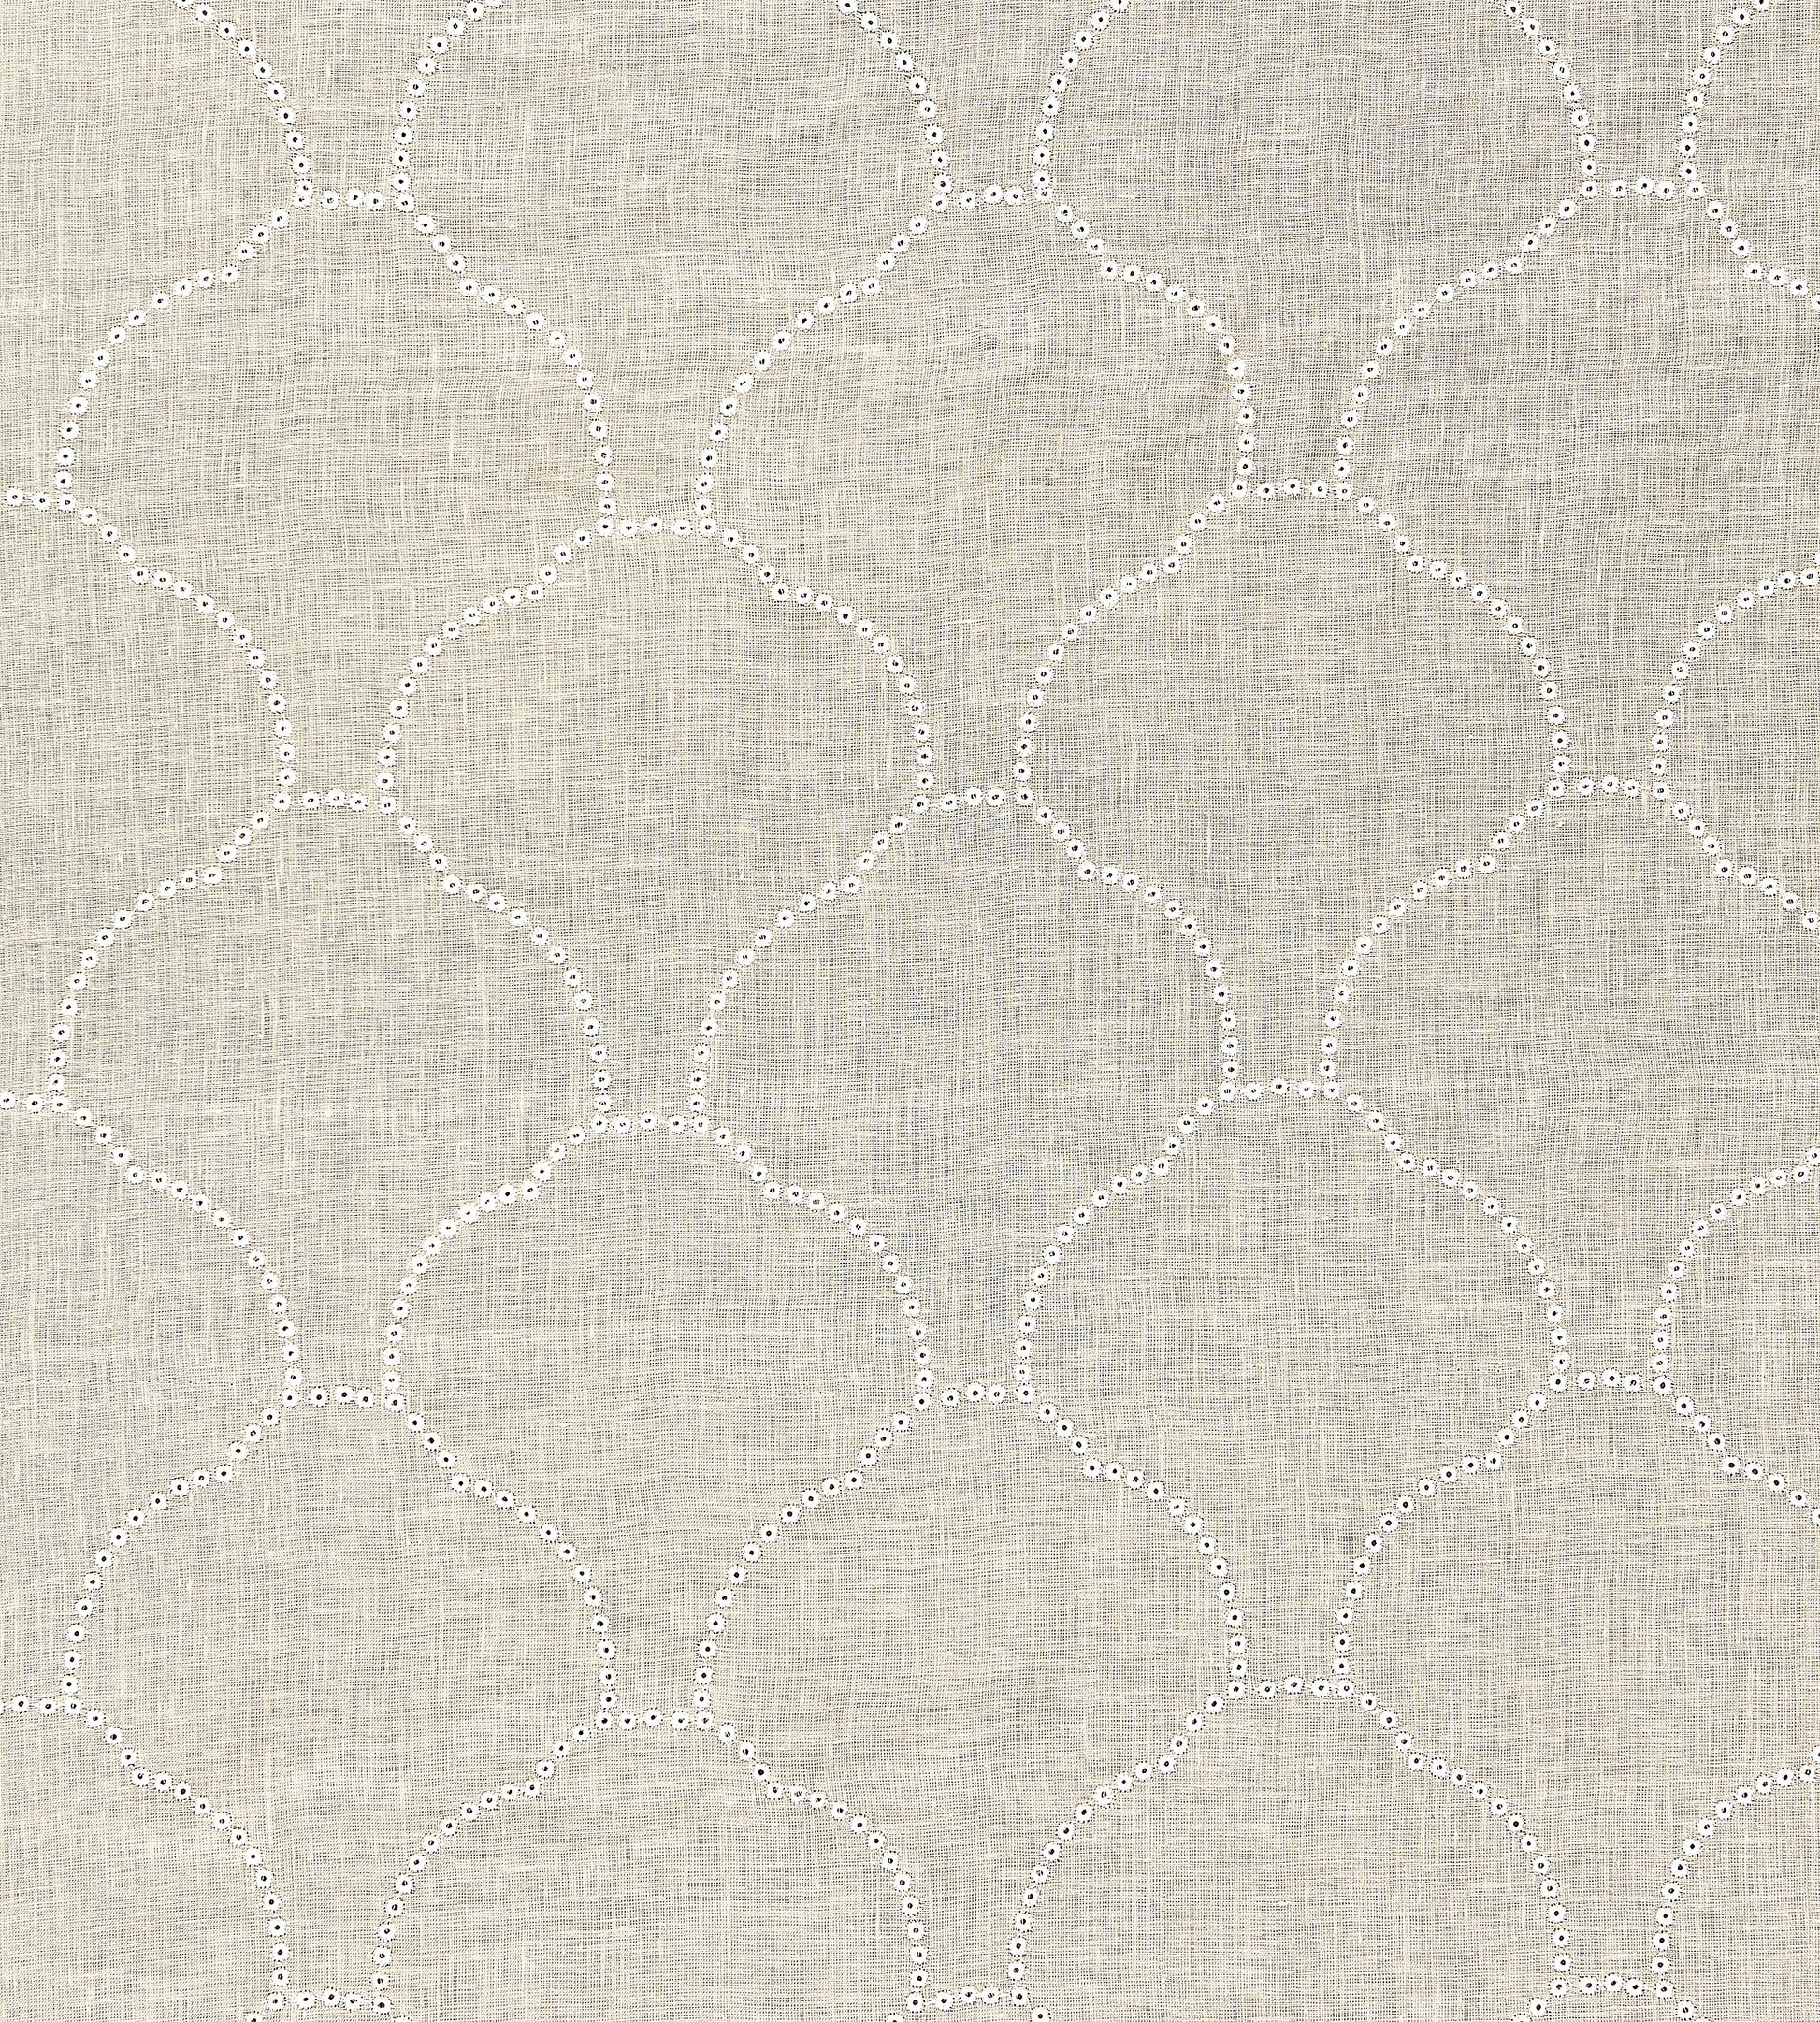 Purchase Scalamandre Fabric Item# SC 000227038, Coquille Sheer Flax 1